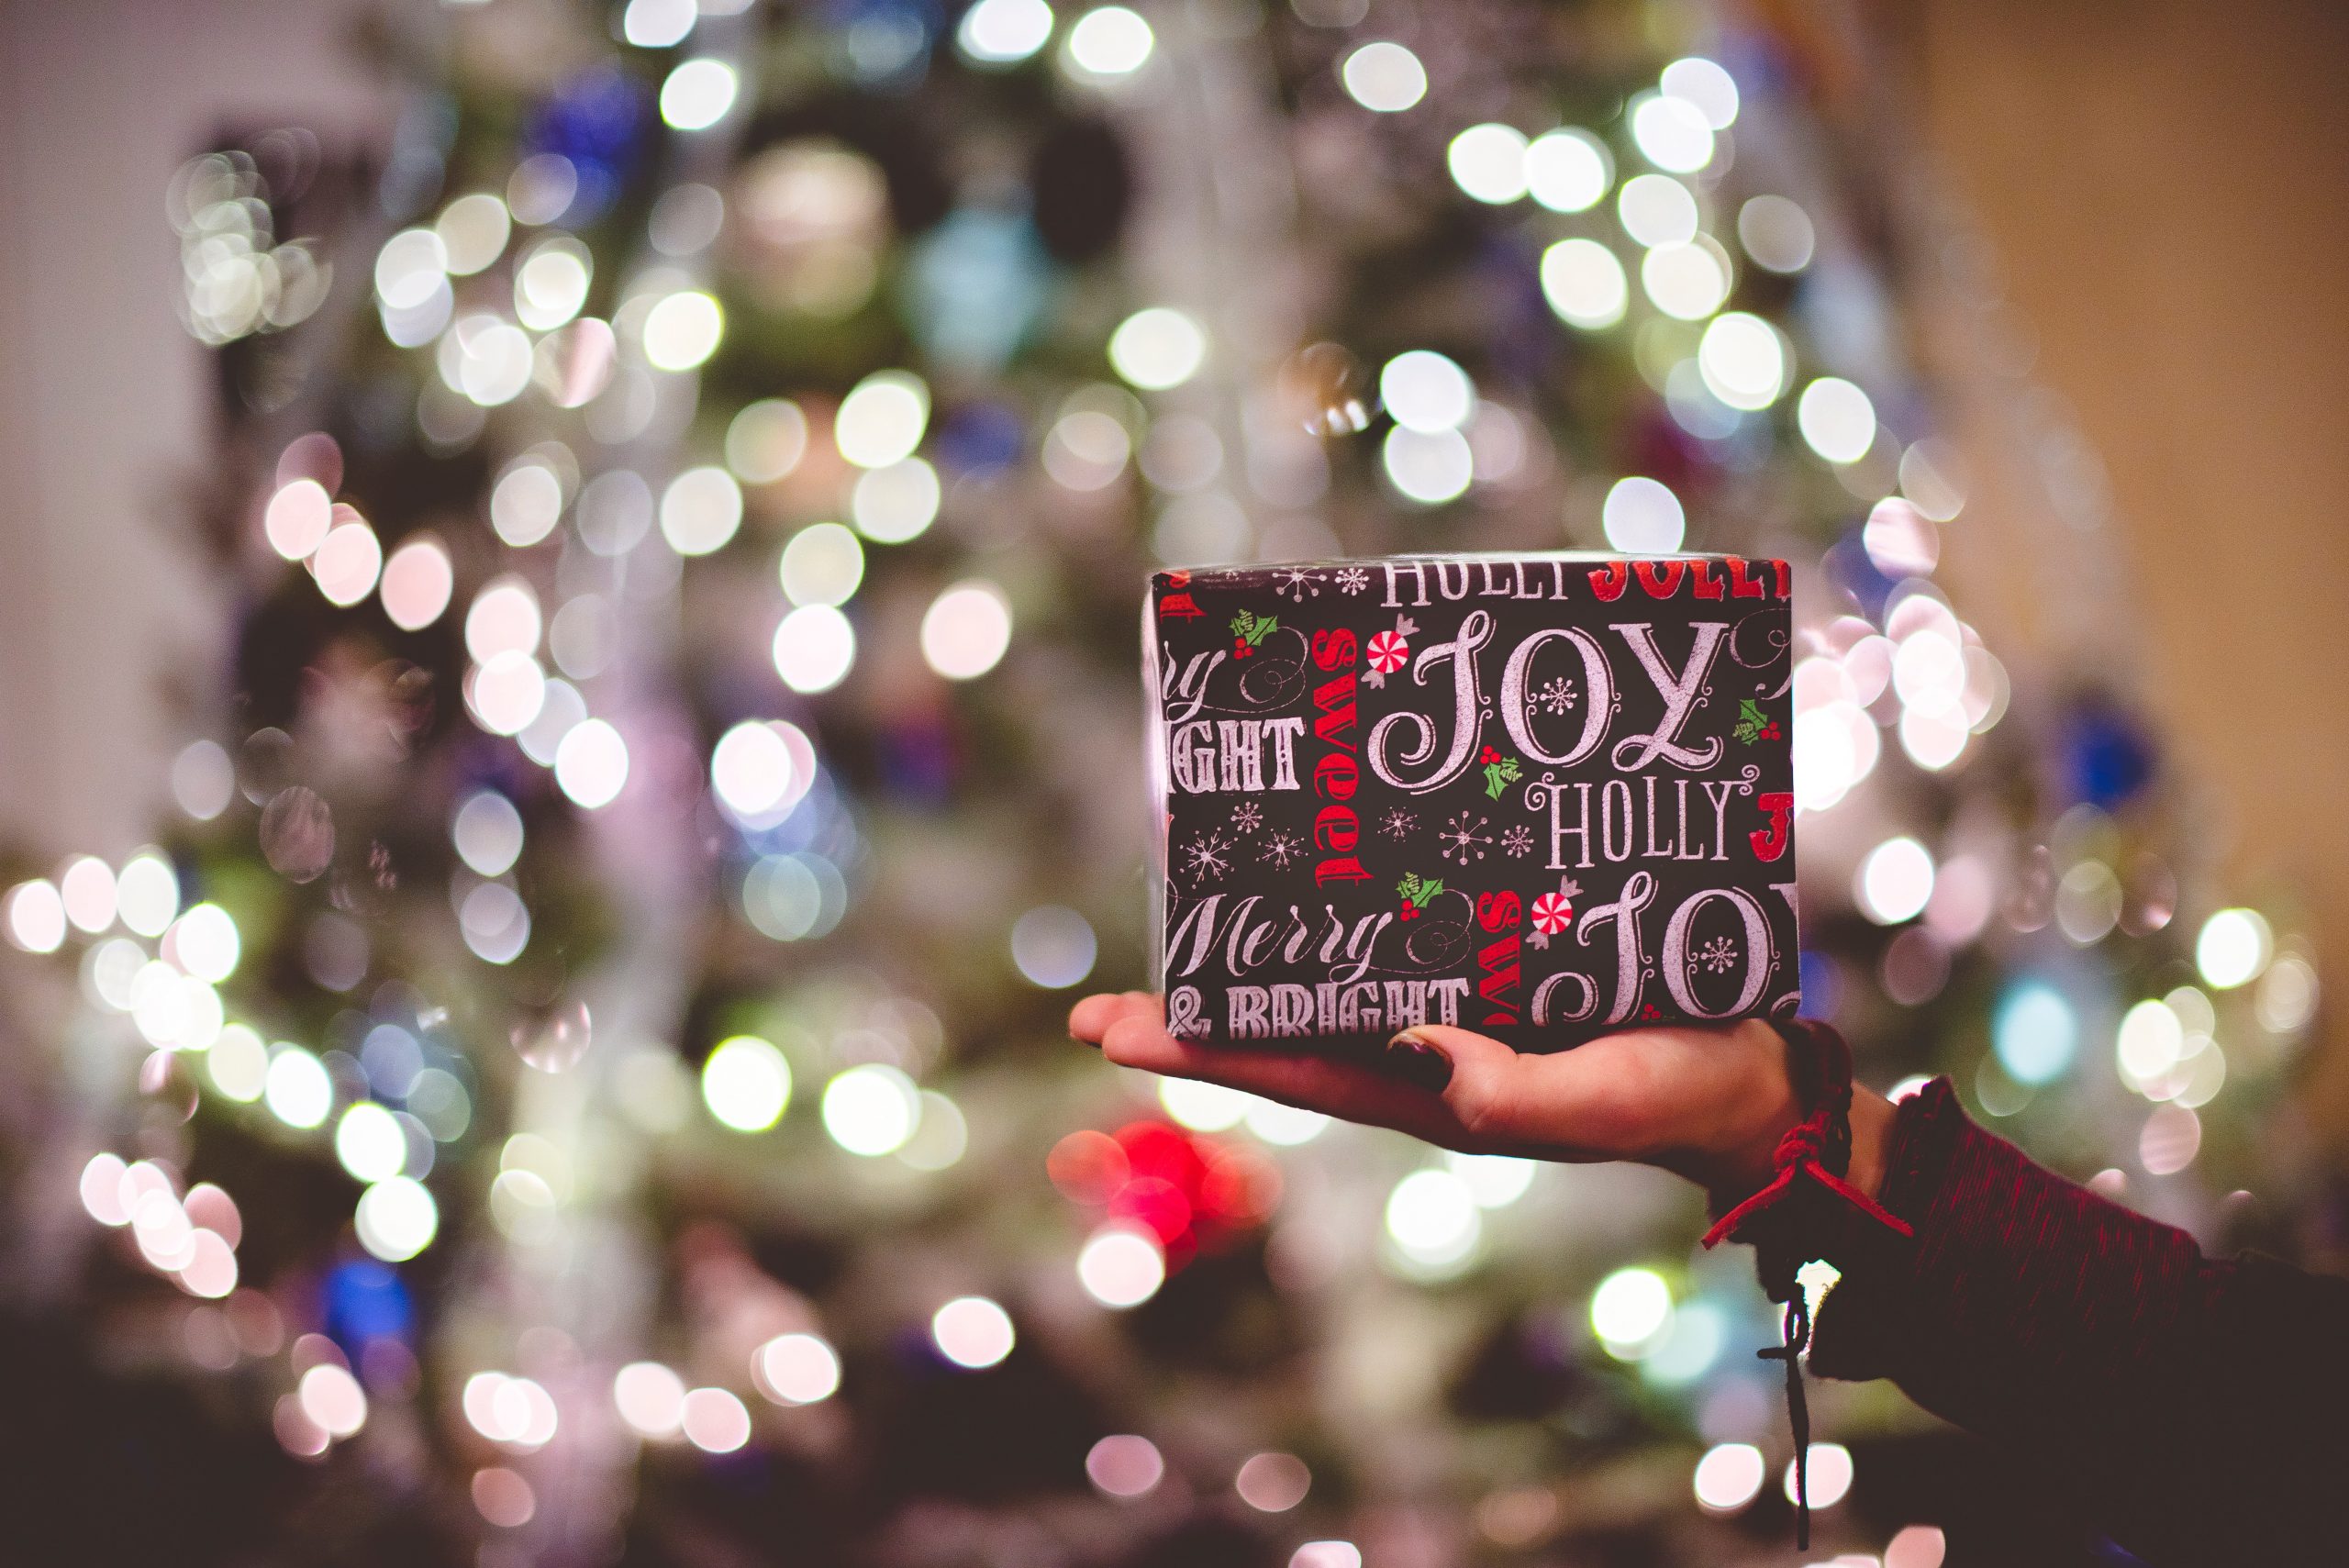 Hand holding a festive gift box with 'Joy, Holly, Jolly' text against a blurry Christmas tree backdrop.